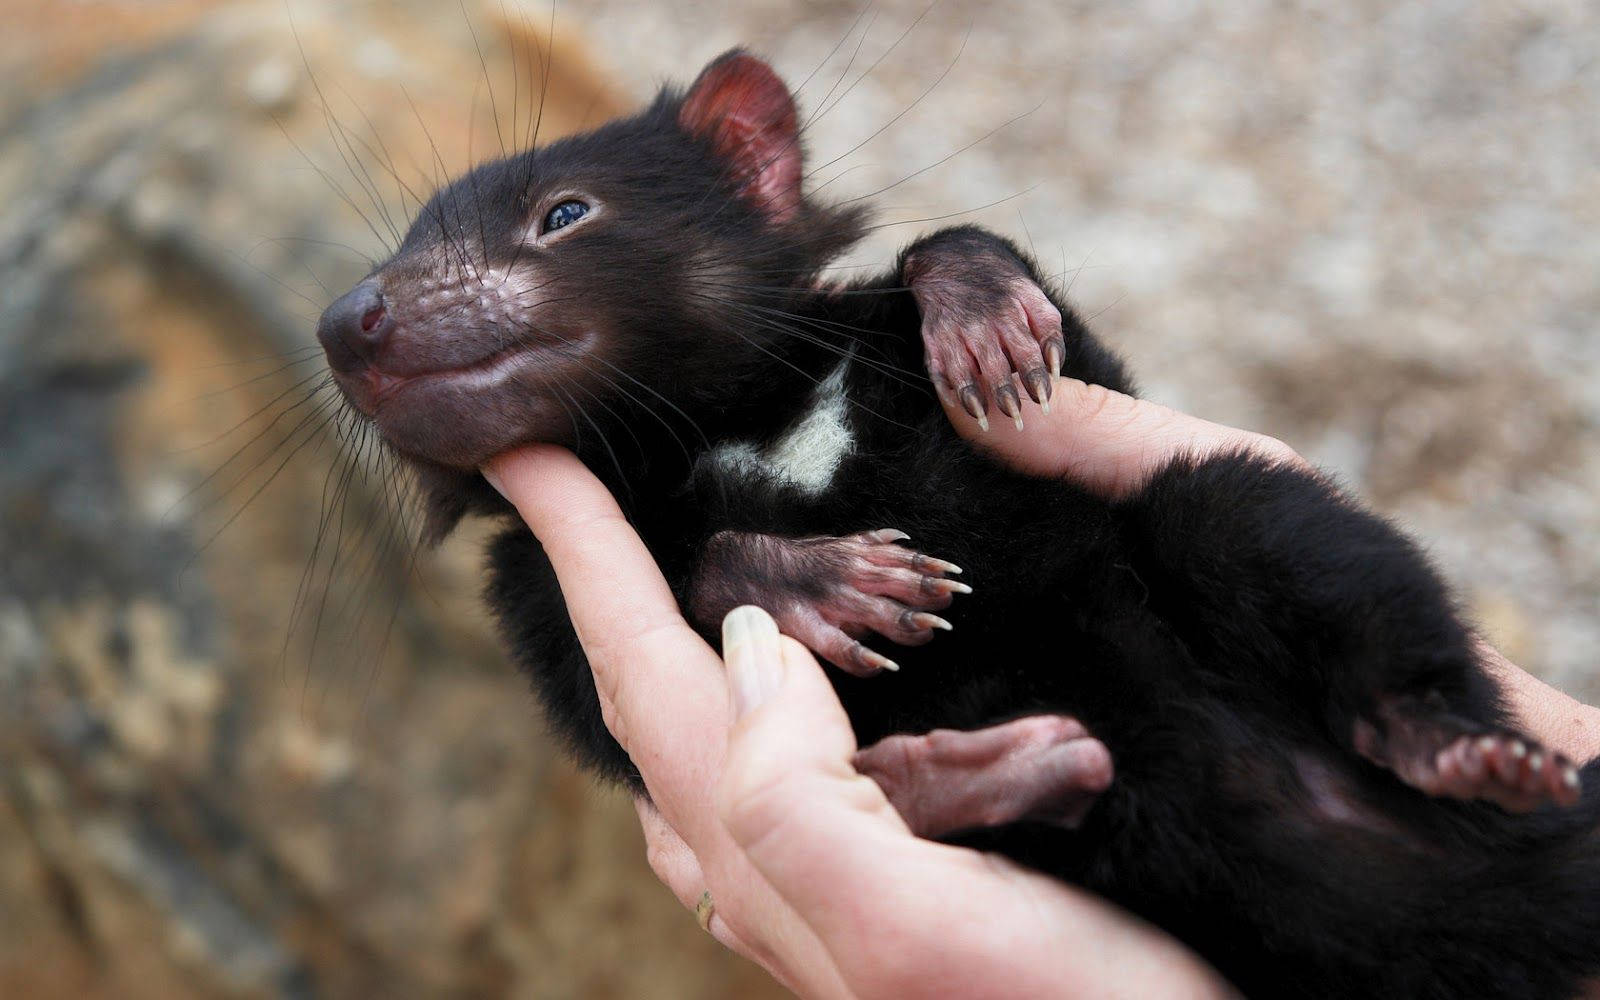 A Small Black Animal Being Held In Someone's Hand